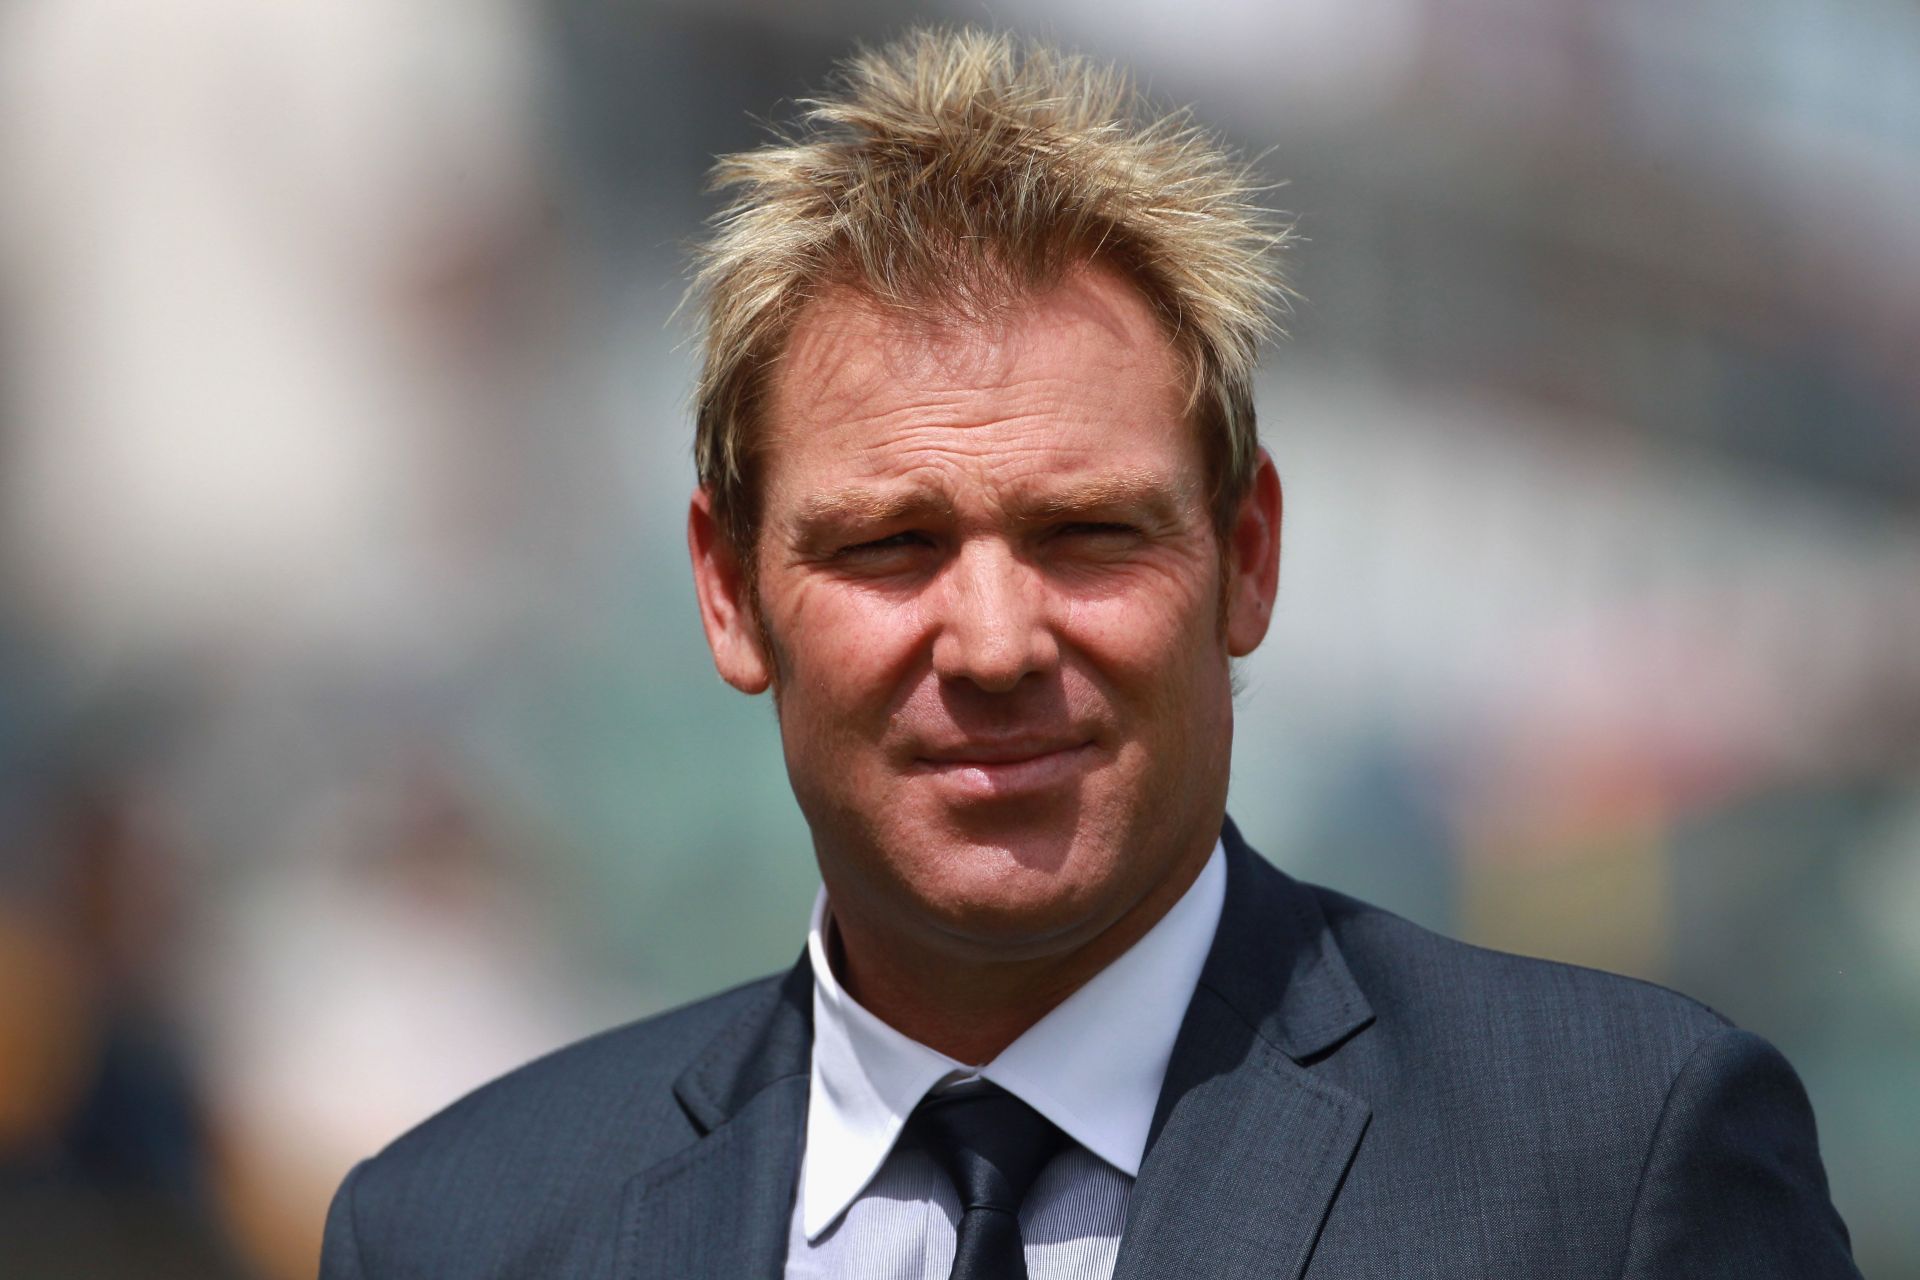 Shane Warne returned from the 2003 World Cup in South Africa